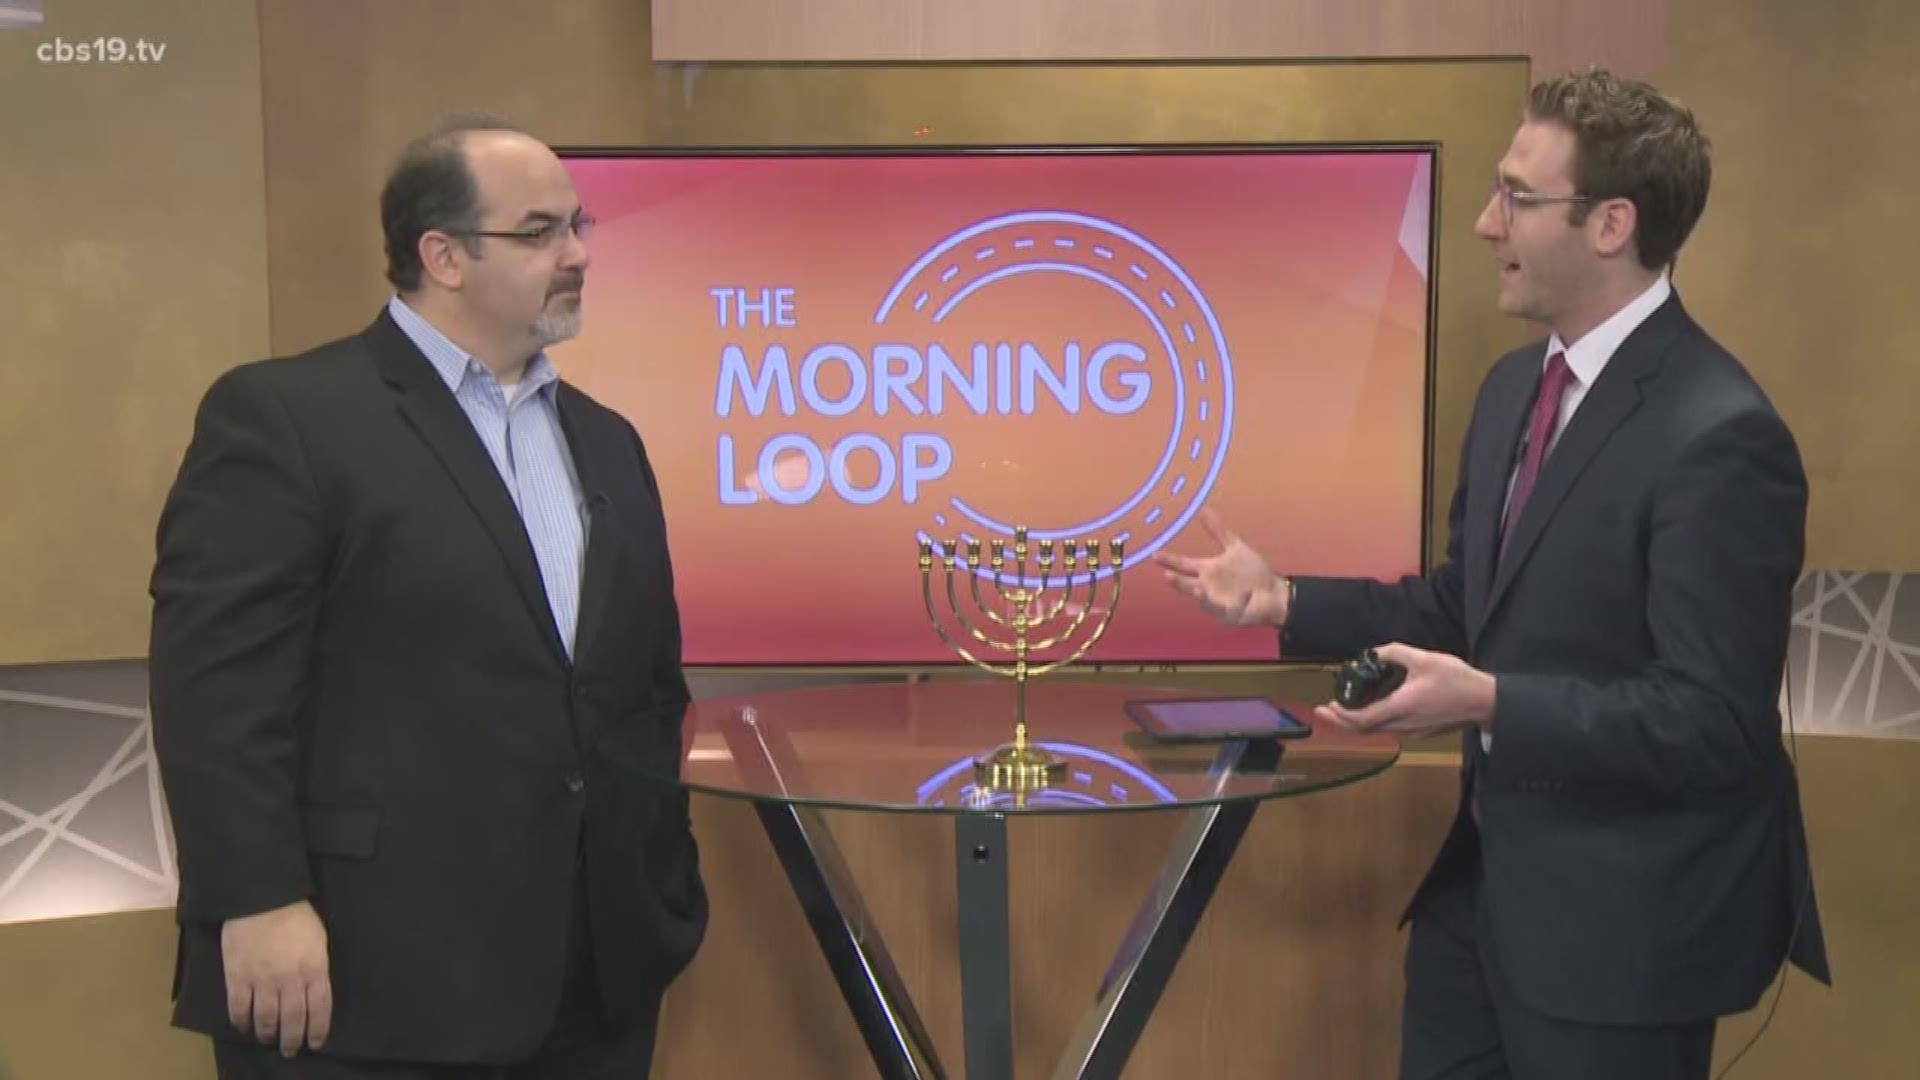 Rabbi Neal Katz of Congregation Beth El joined The Morning Loop to discuss the meaning of Chanukah.